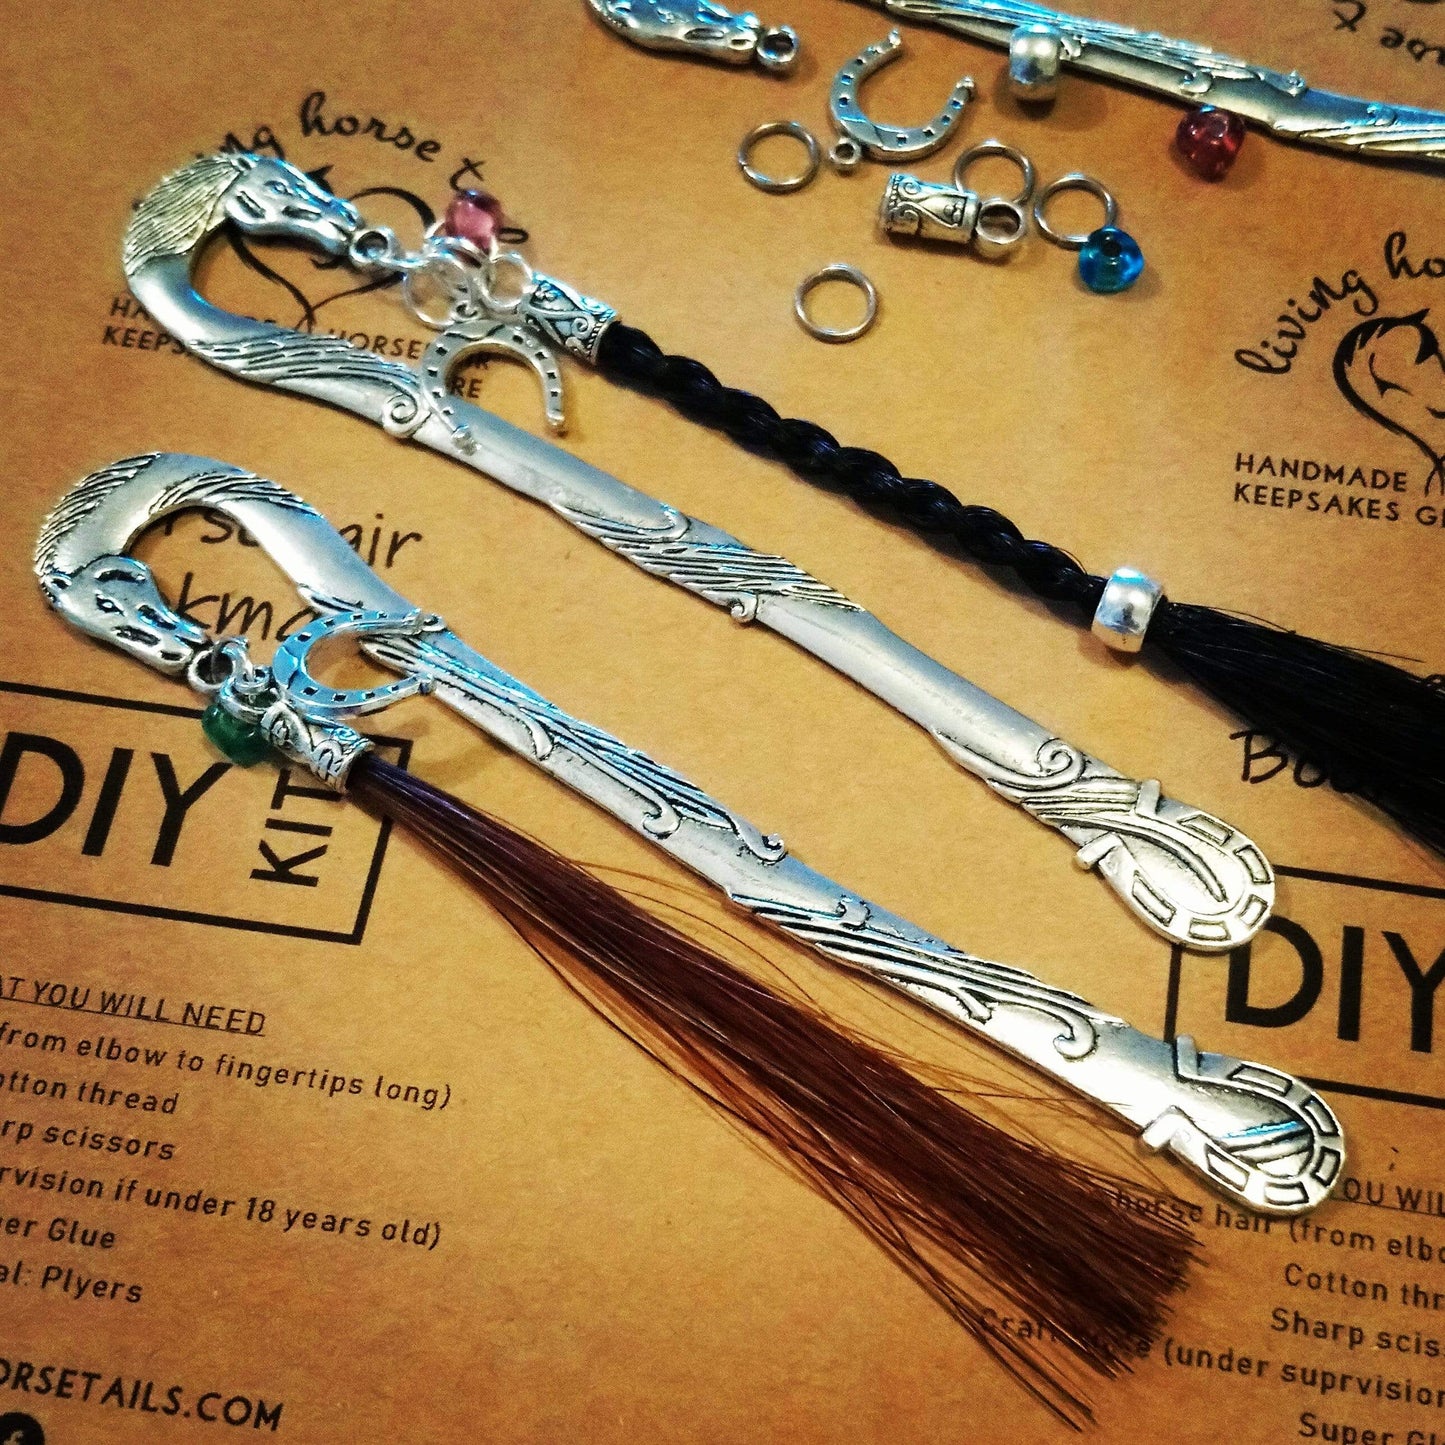 DIY Double Up Kit - Make Your Own Horsehair Bracelet and Key Ring / Ba –  Living Horse Tails Jewellery by Monika